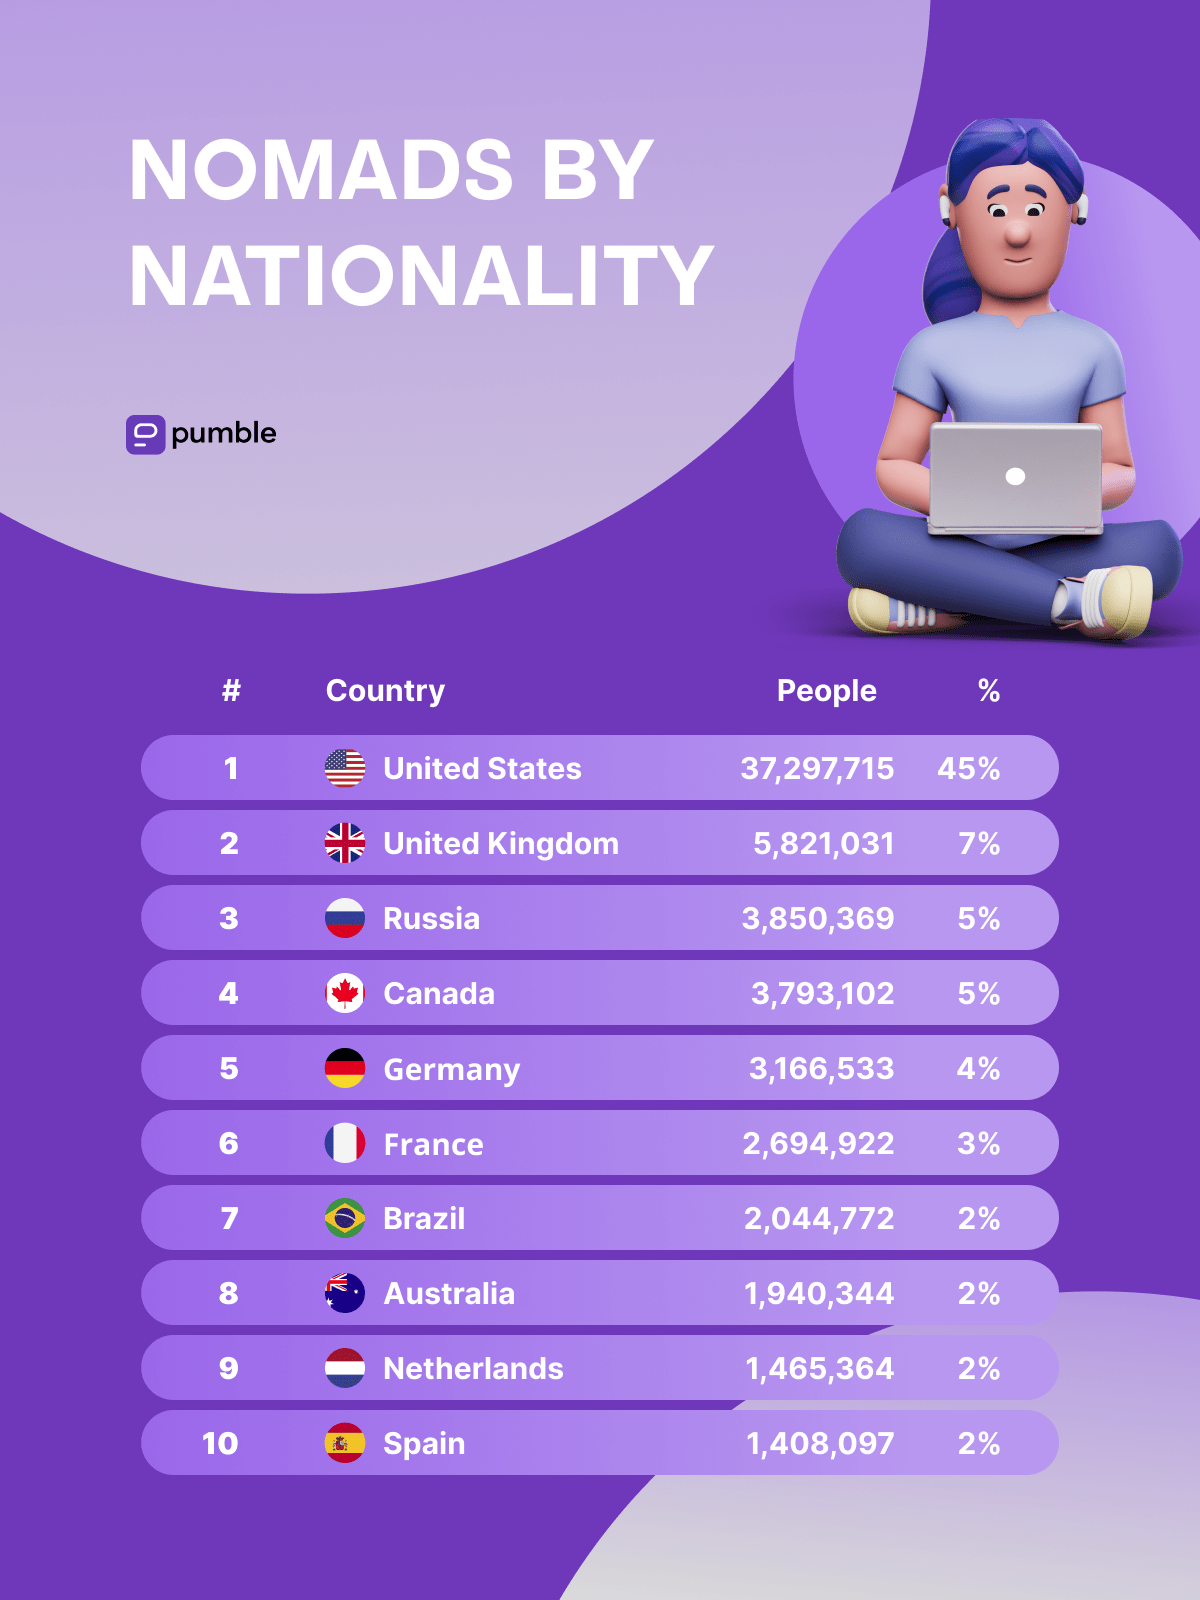 Nomads by nationality, according to the Nomad List